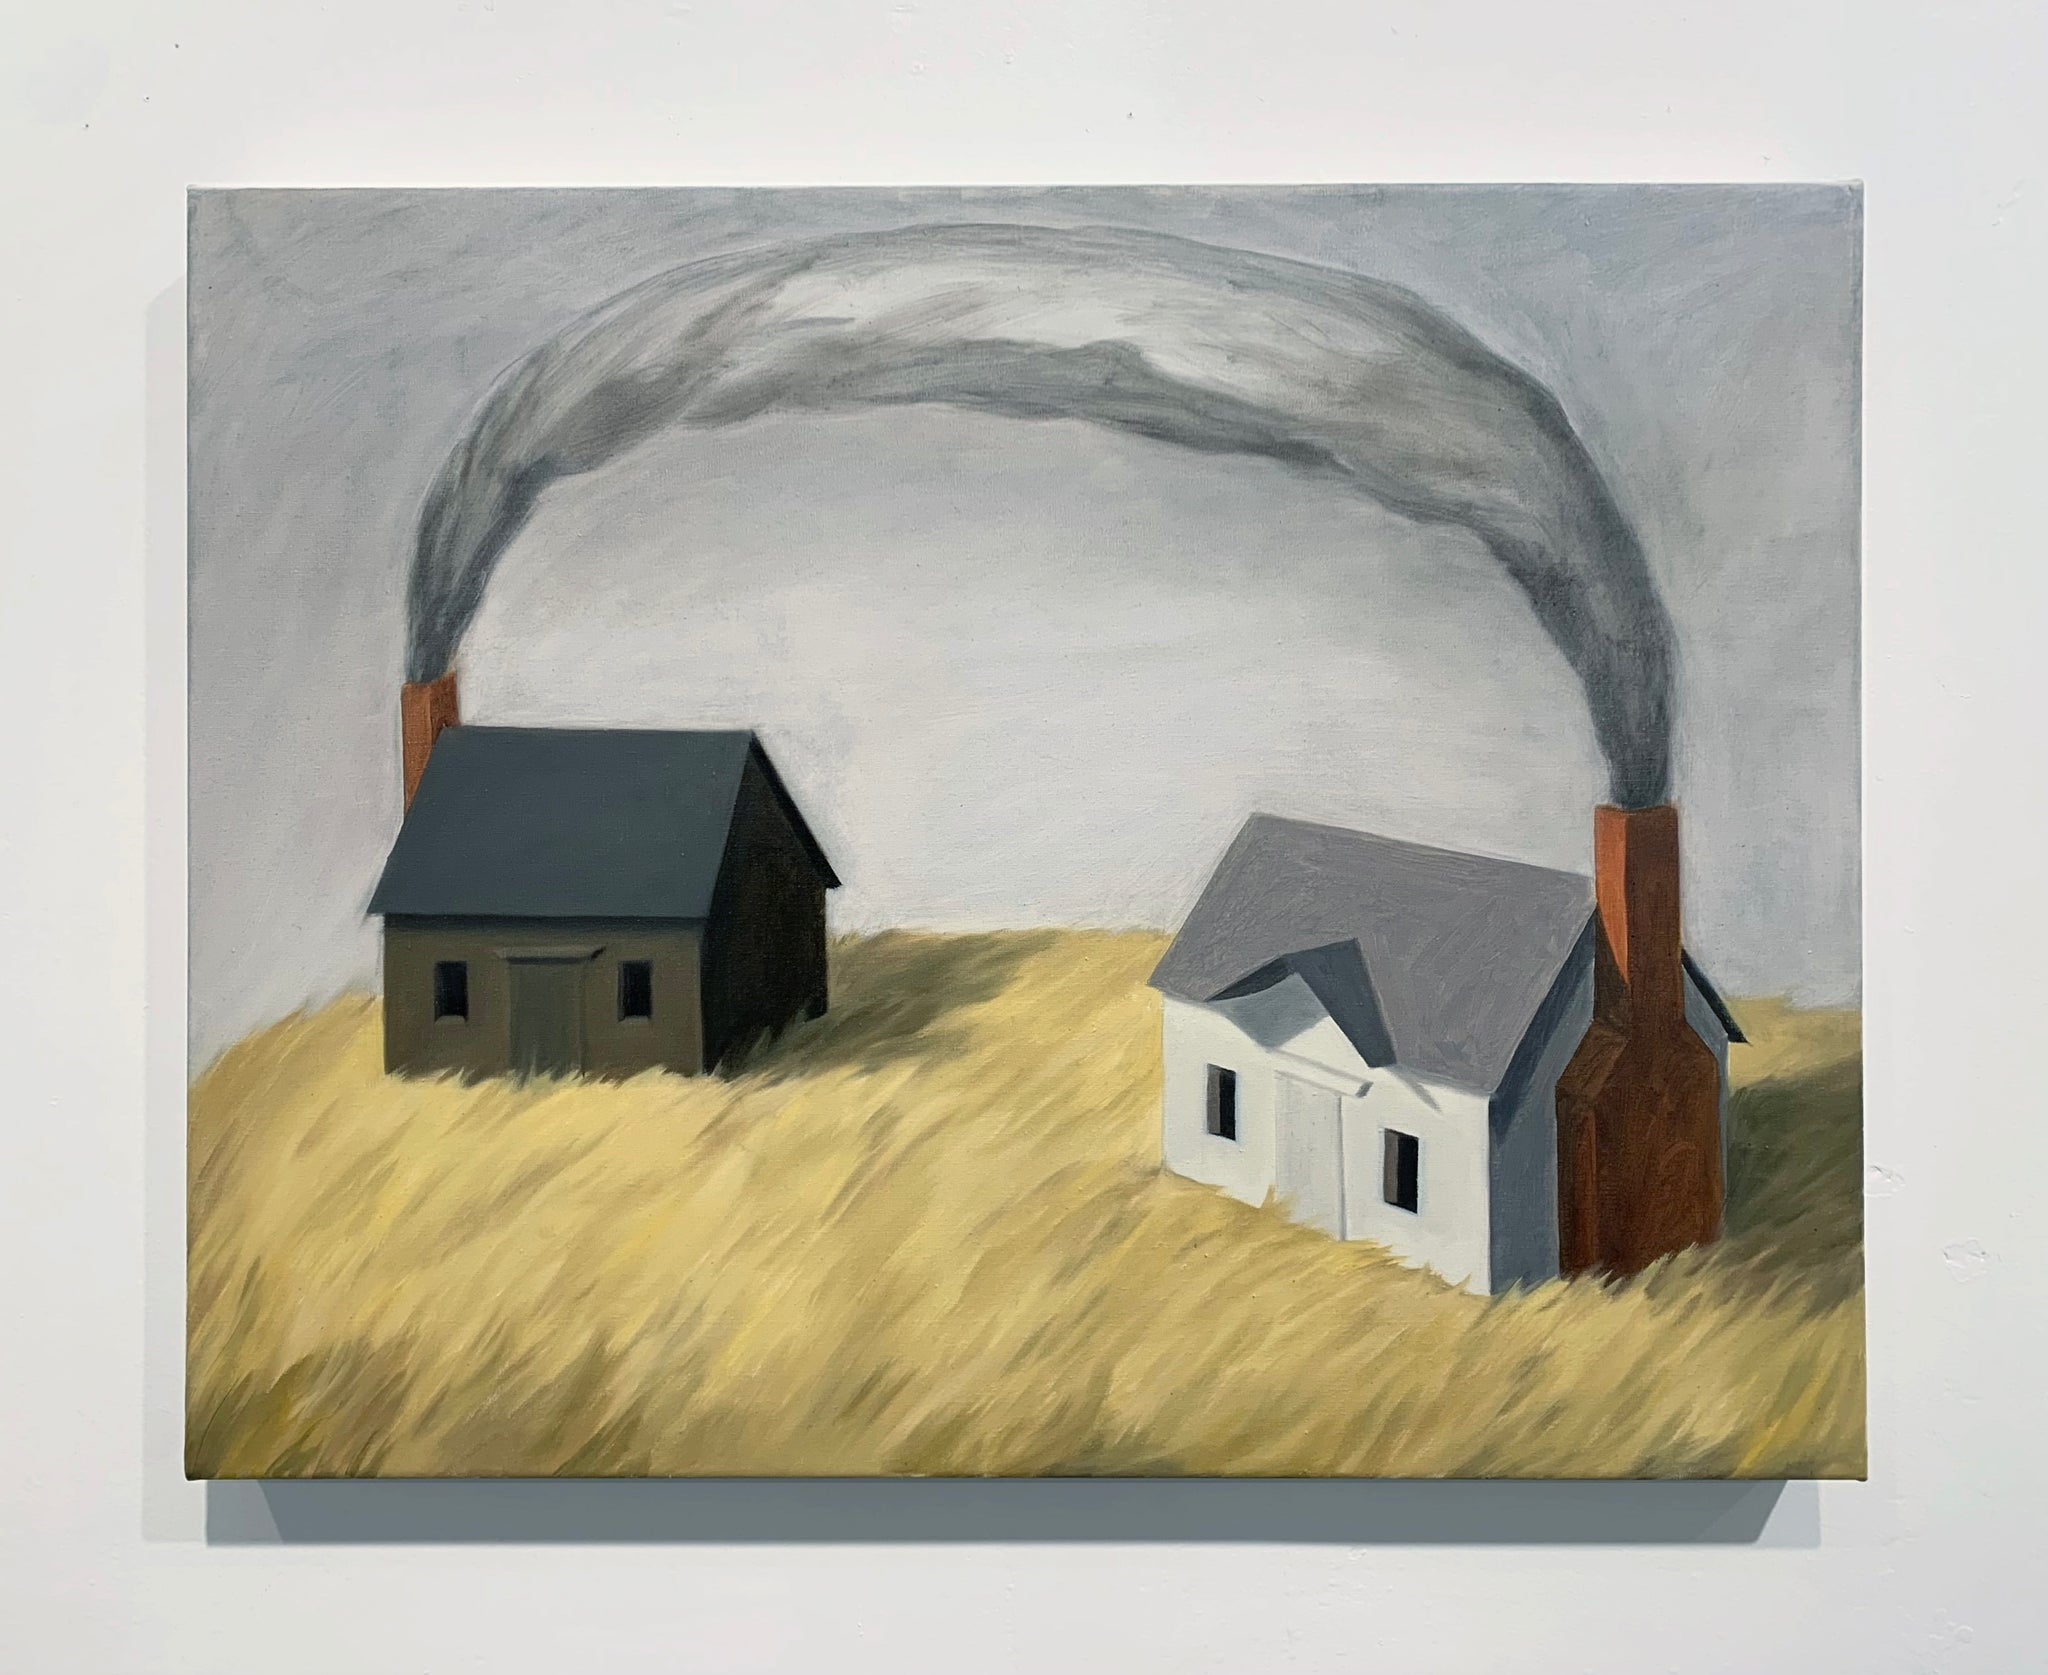 Cate Pasquarelli, "Two Houses" SOLD